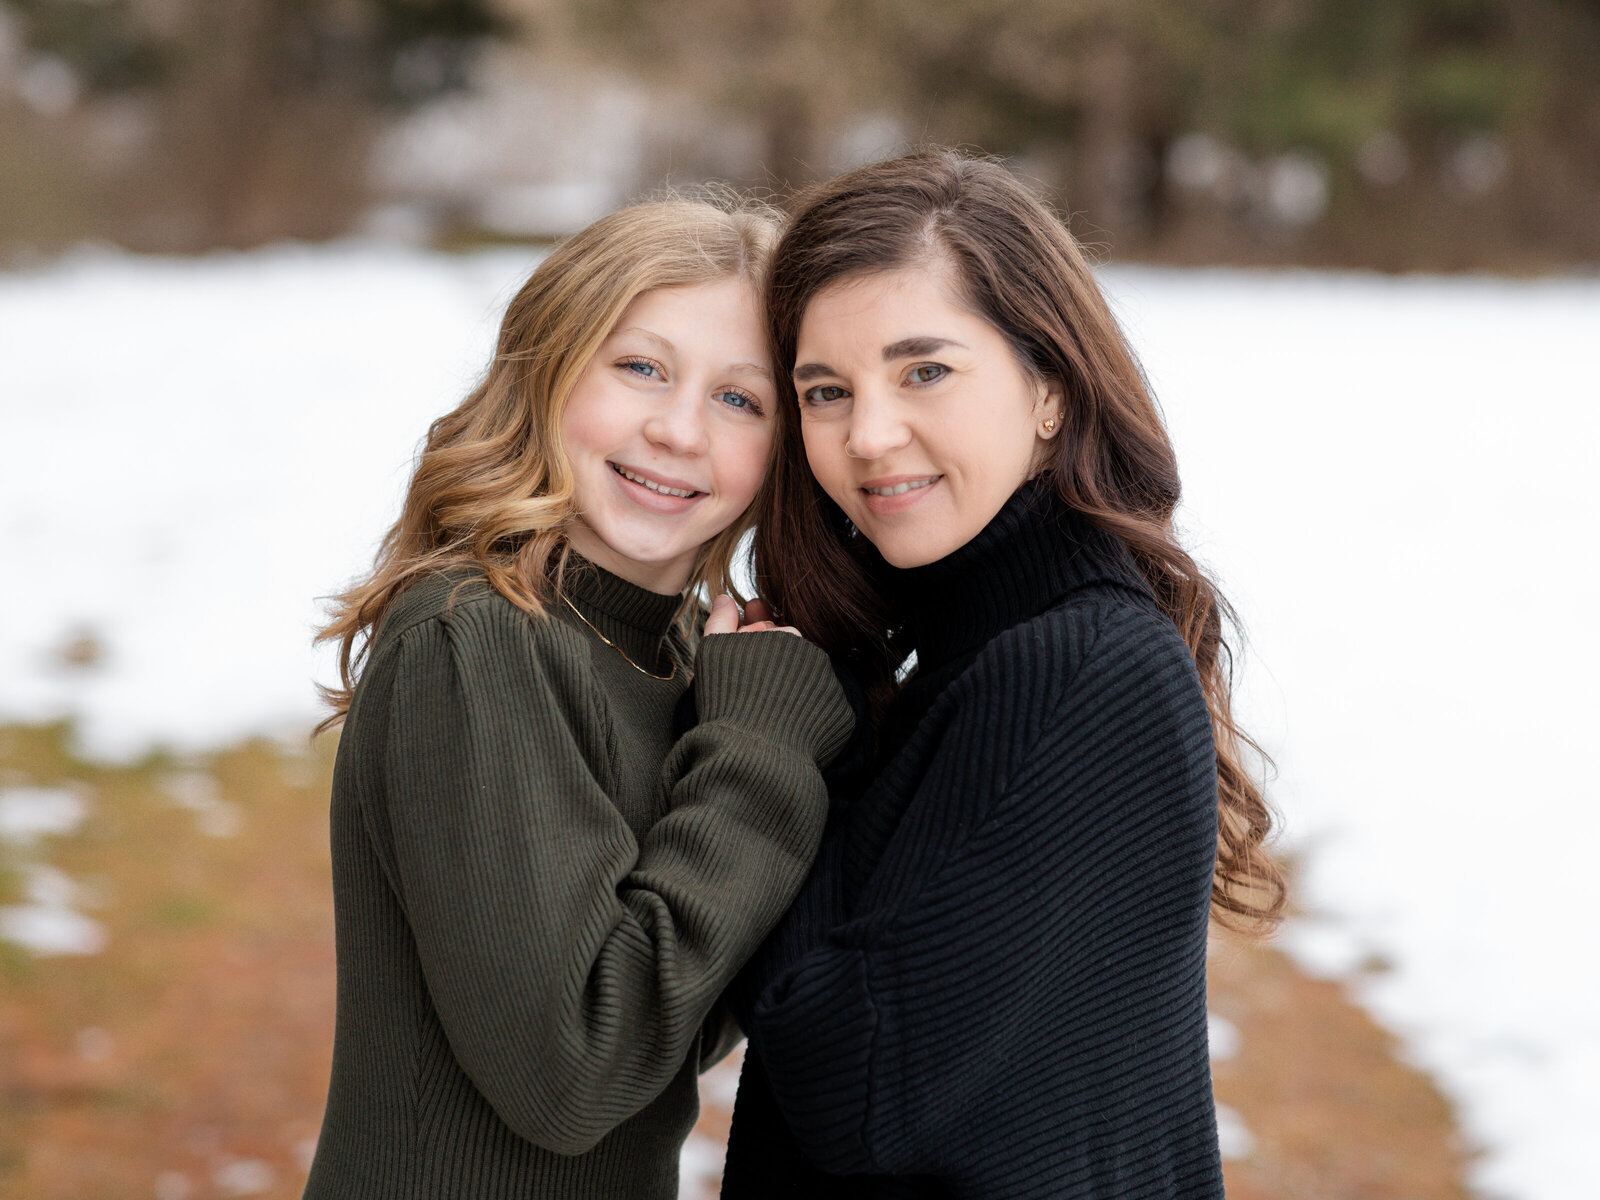 mother and daughter holding hands for family photoshoot at the park